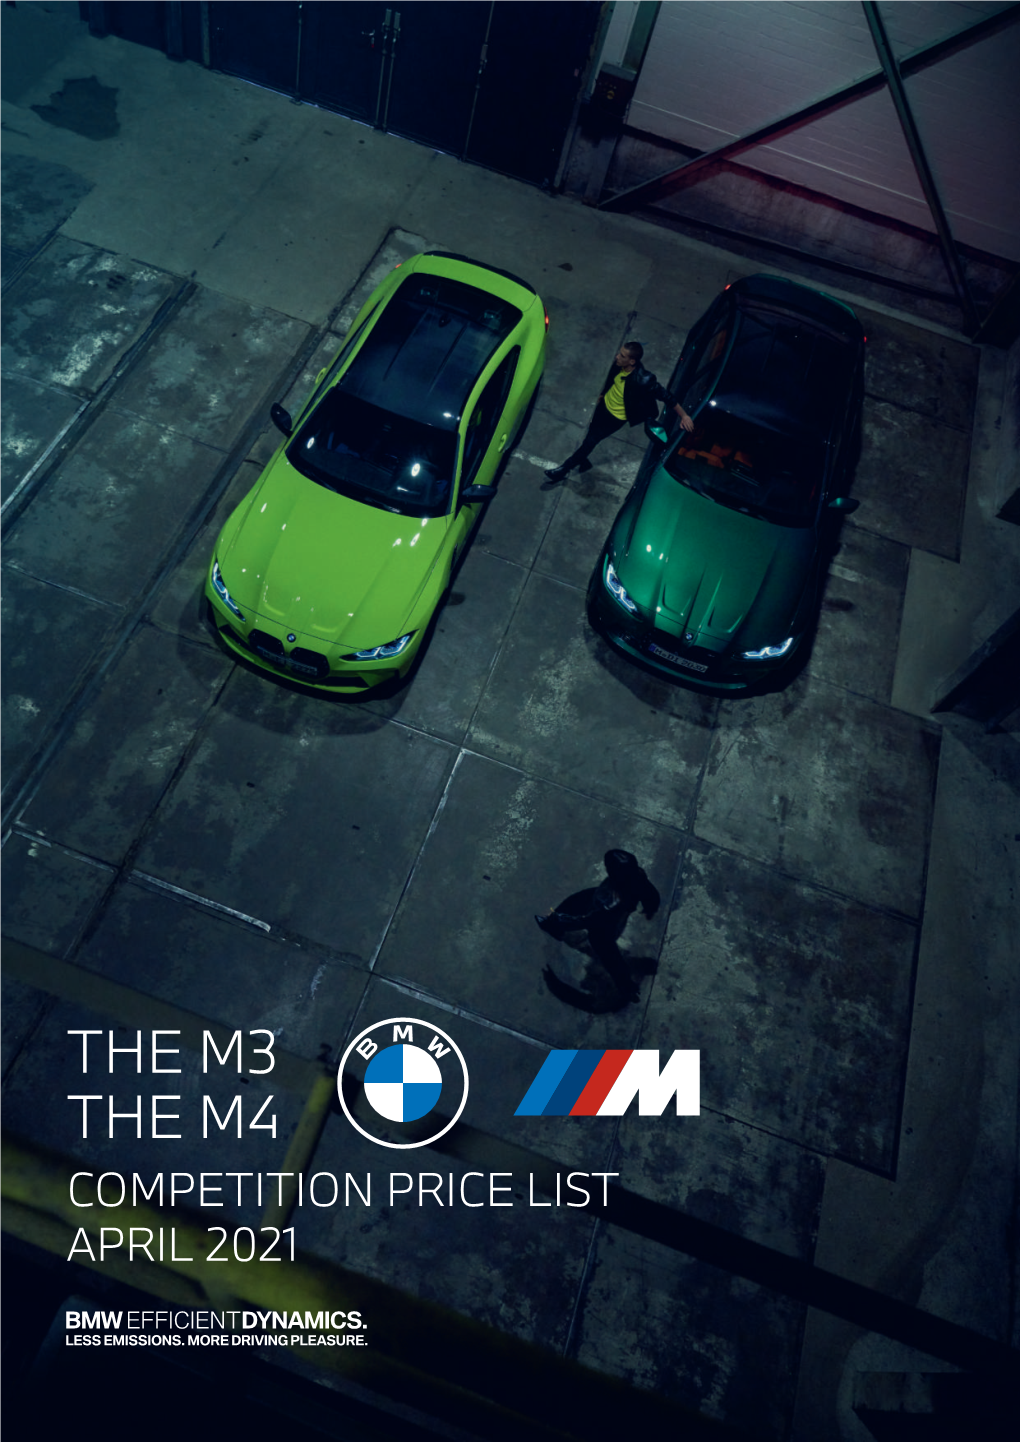 The M3 the M4 Competition Price List April 2021 the All-New M3 and M4